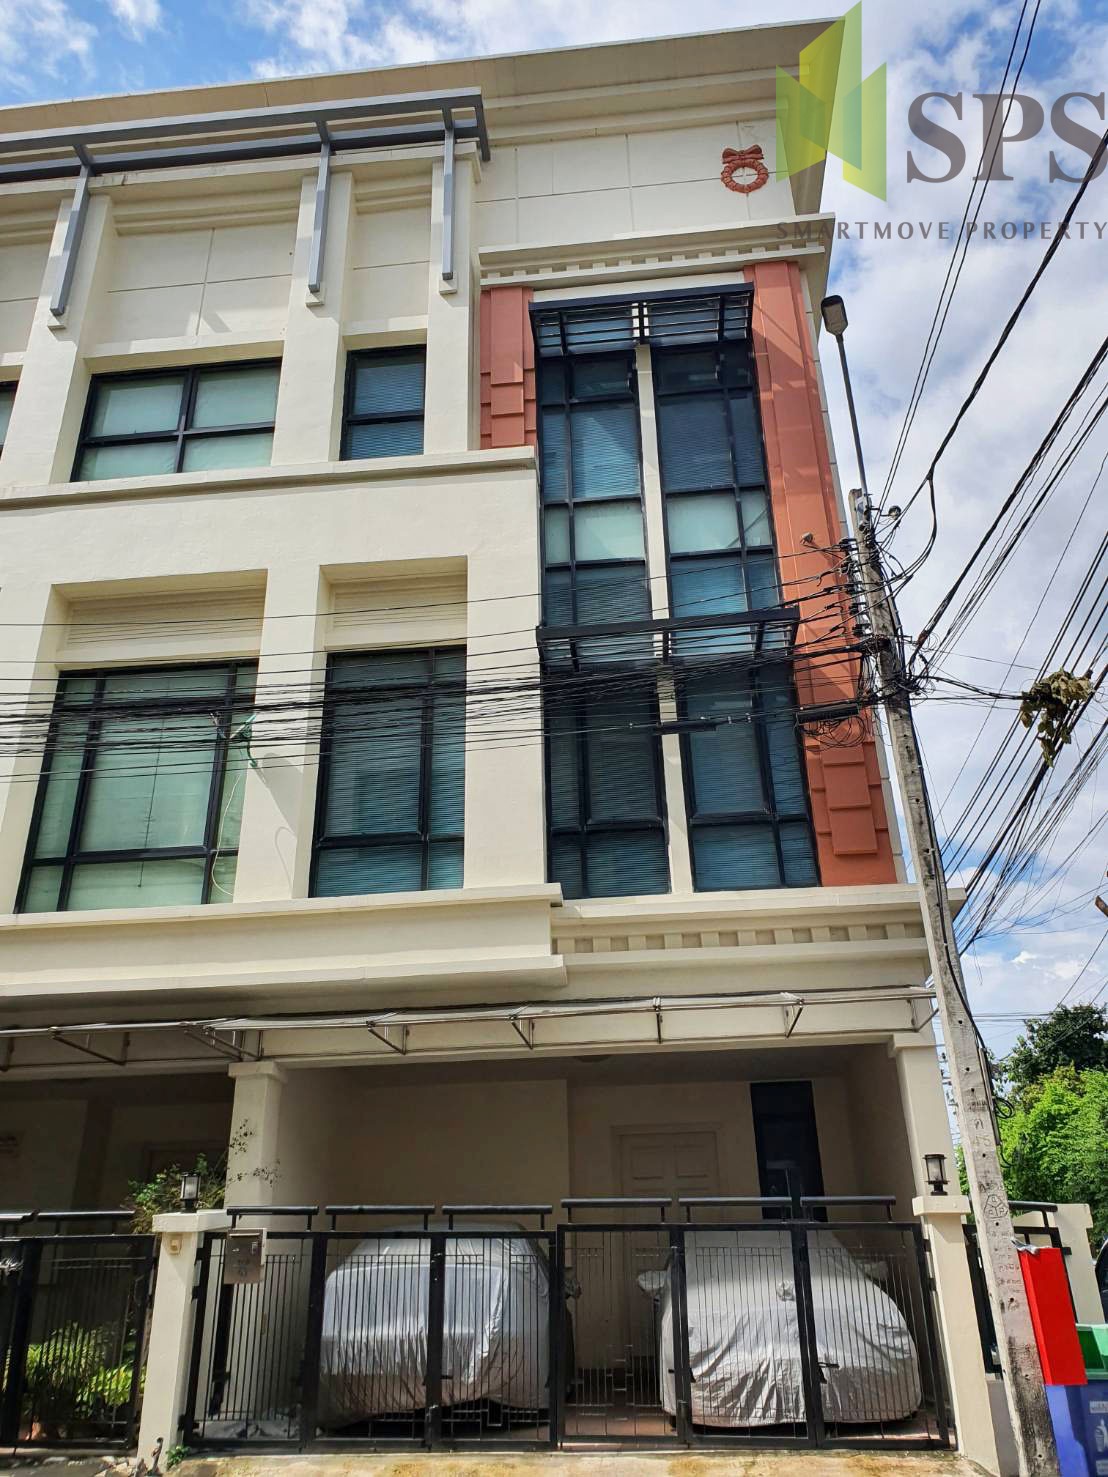 Home Office in the project for RENT in Bangna Trad Rd opposite Central Bangna (SPSP237)